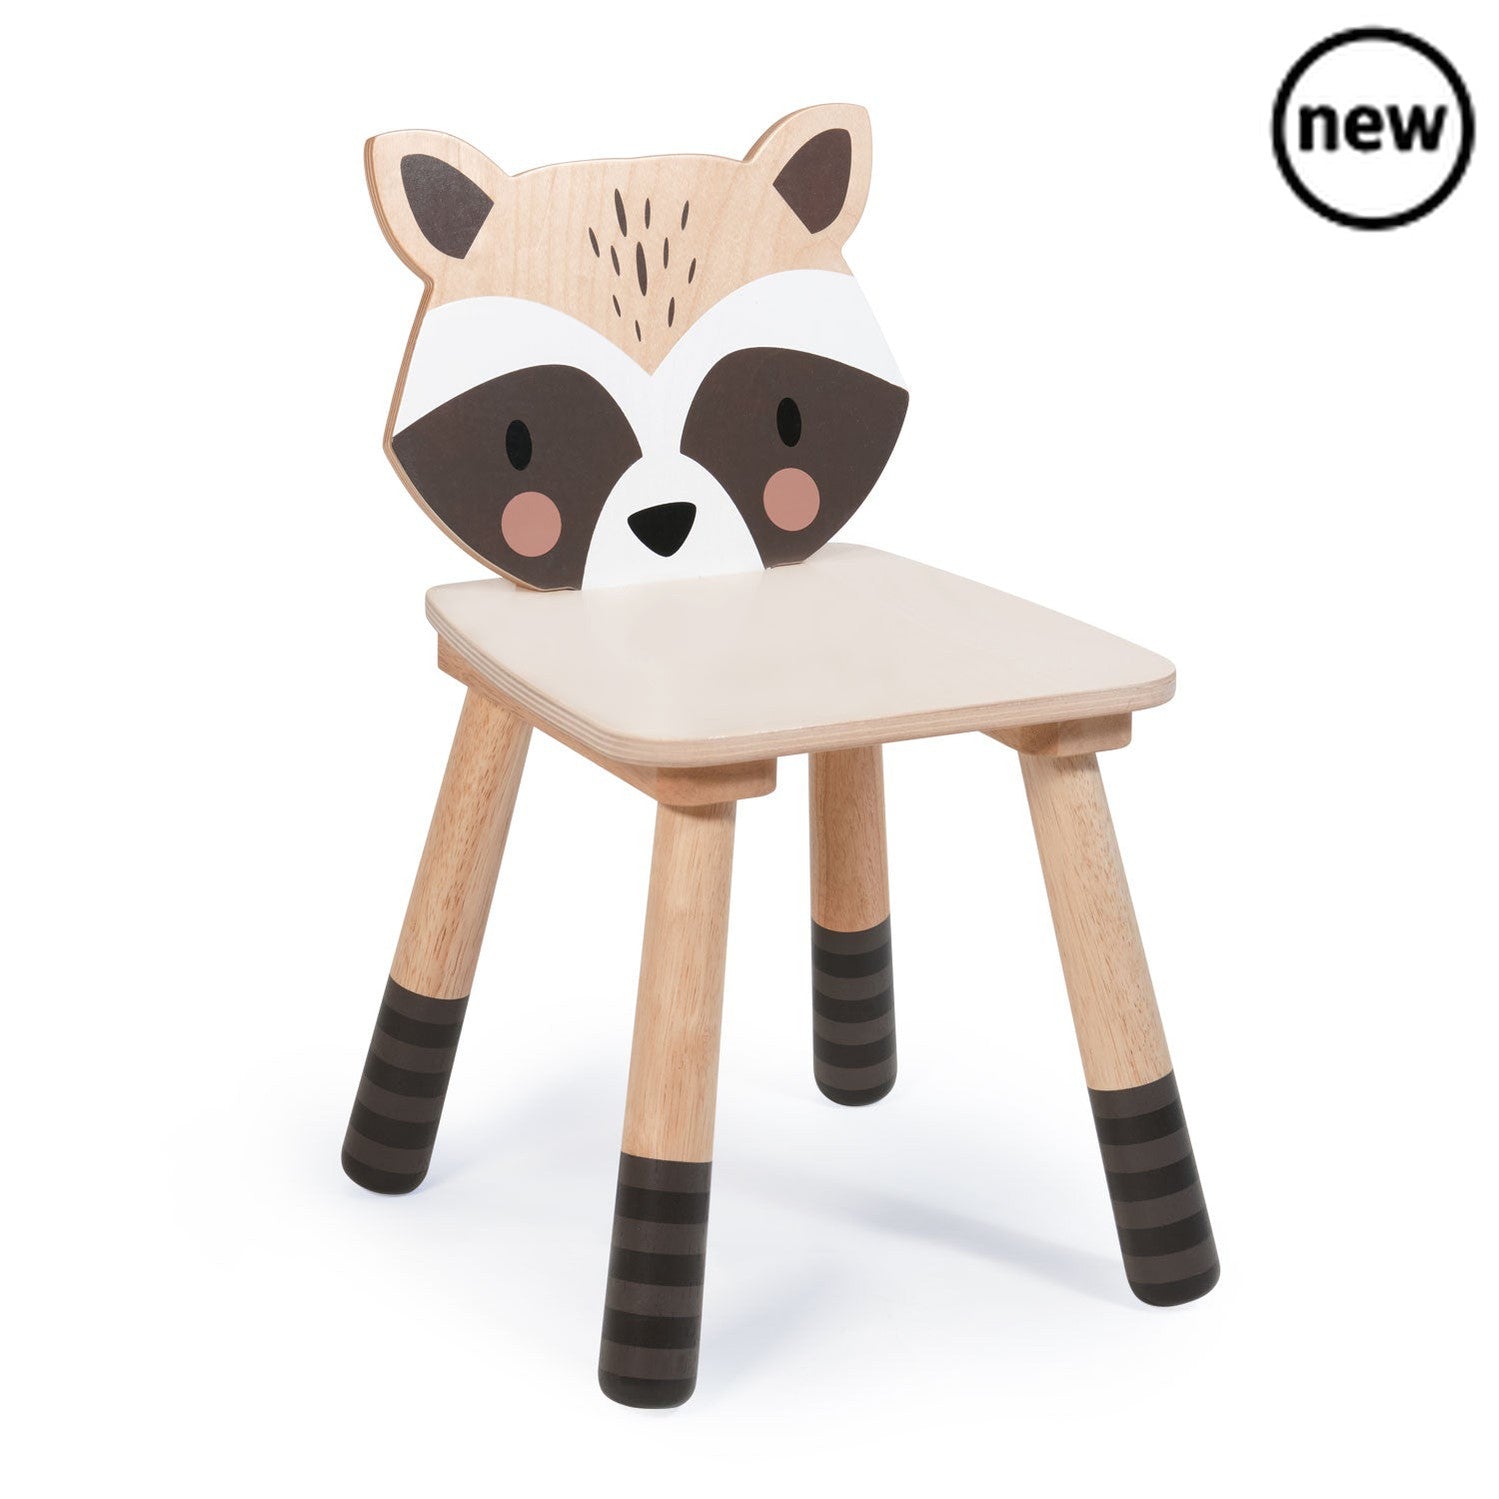 Tenderleaf Toys Wooden Forest Raccoon Chair, This fun high quality plywood Raccoon chair by Tender Leaf Toys works perfectly with the Tender Leaf Toys Forest table, or your own small table. Children will love sitting in this very fun Koala chair! Self Assembly 0.345x0.102x0.325 meters, Tenderleaf Toys Wooden Forest Raccoon Chair,Wooden Toys,Tenderleaf, 